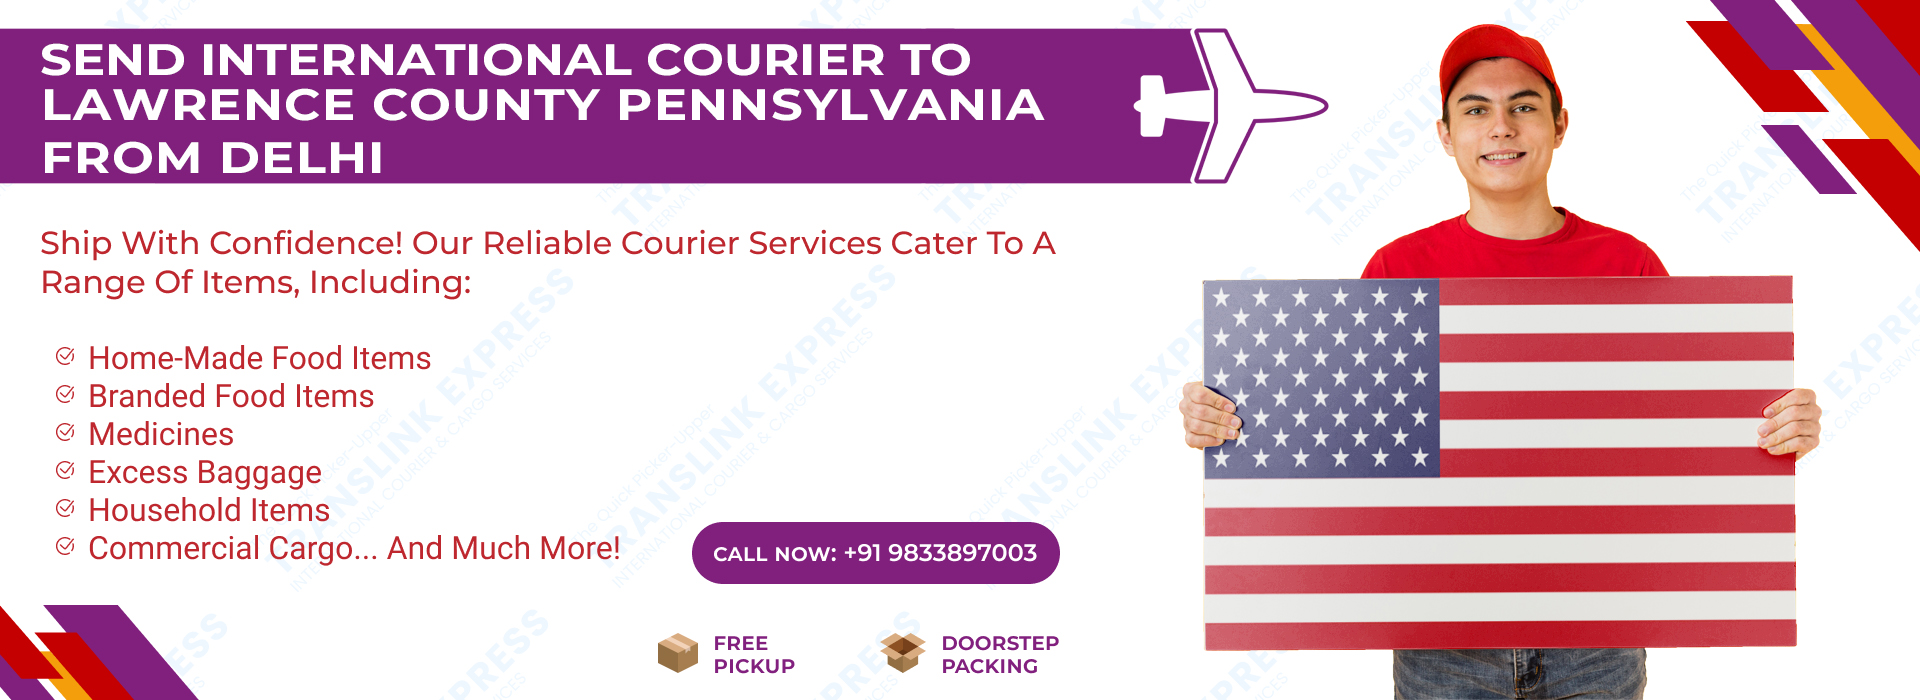 Courier to Lawrence County Pennsylvania From Delhi